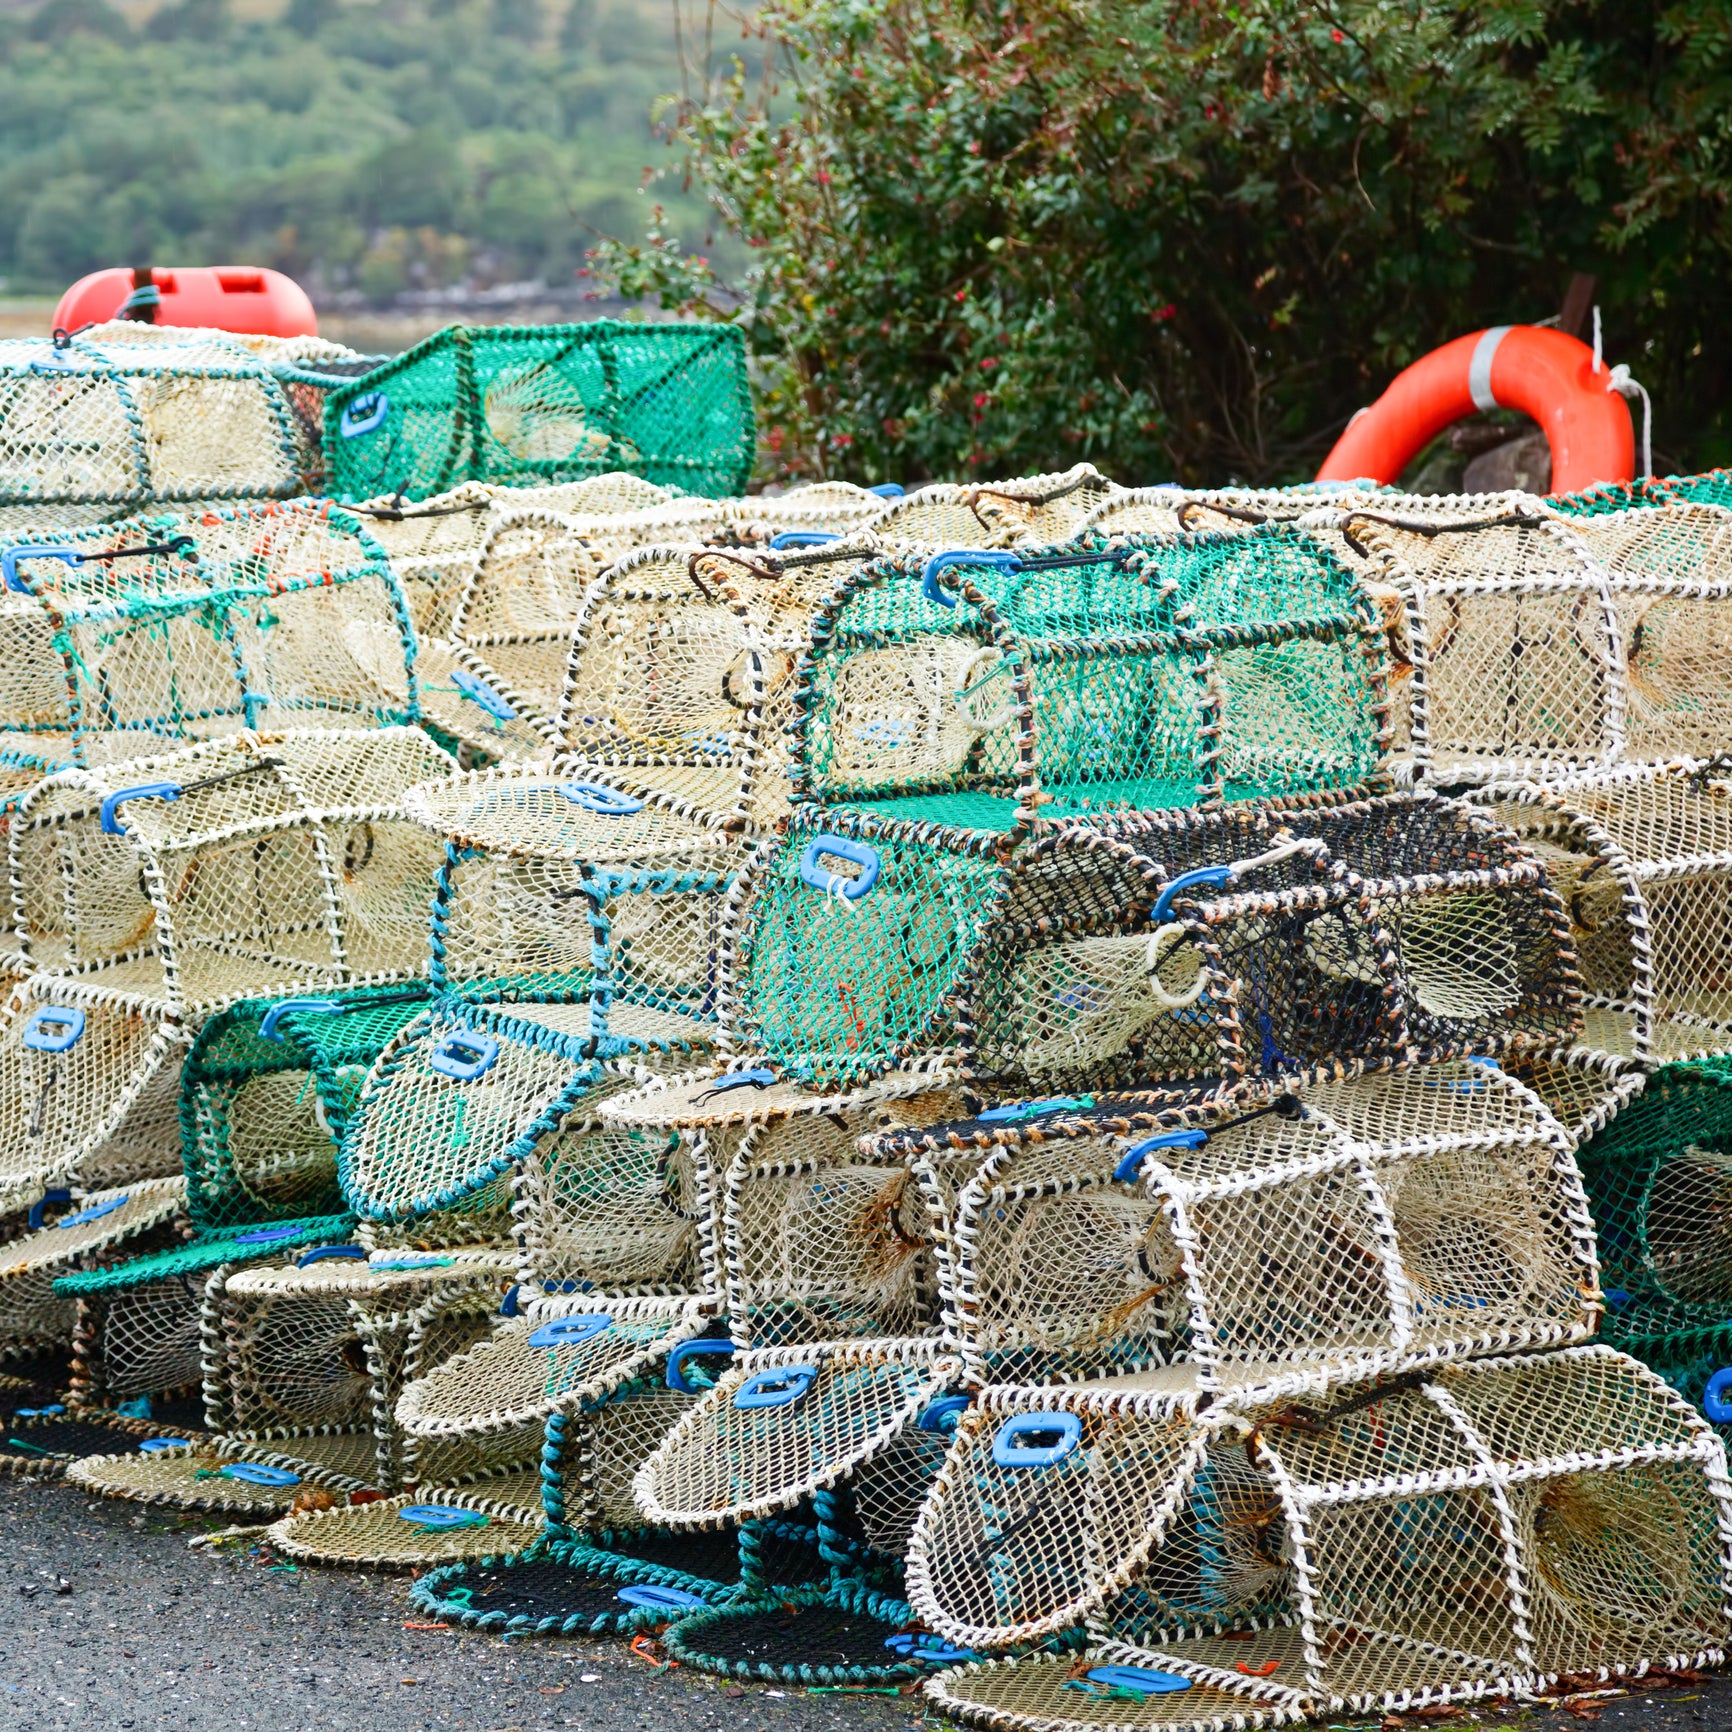 How to Make a Crab Trap at Home